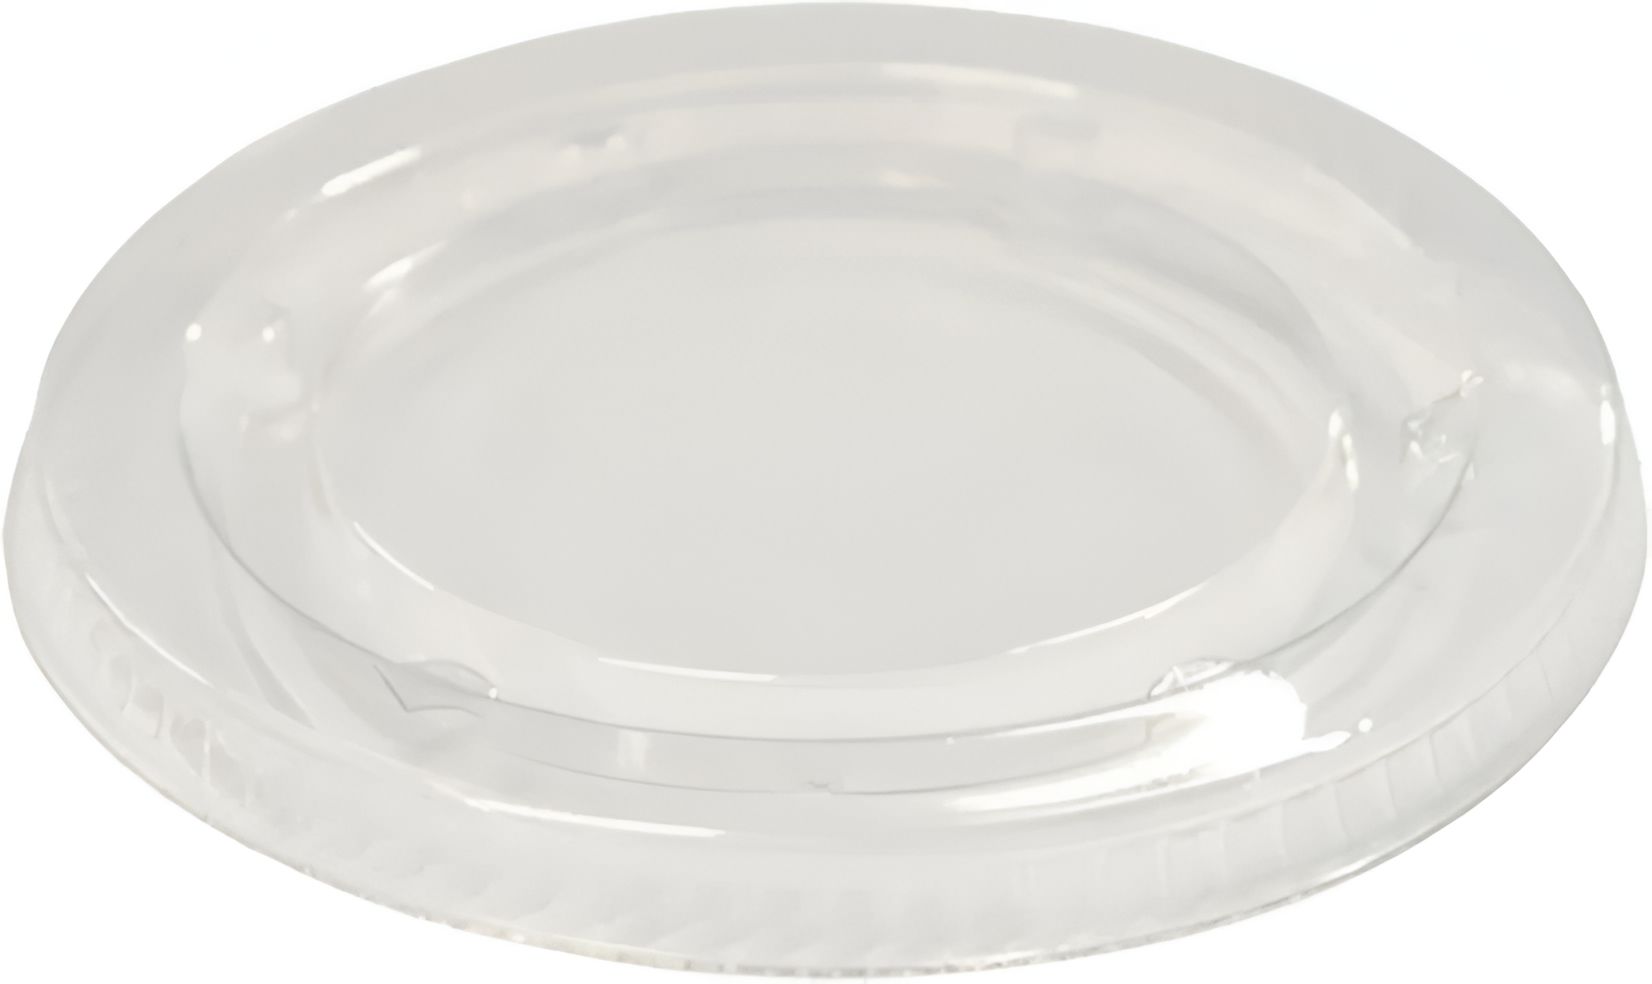 Pactiv Evergreen - Recycled Plastic Flat Lid Fits For YS300/YS400, 3 Oz-4 Oz Plastic Portion Cups, 2400/Cs - YLS3FR